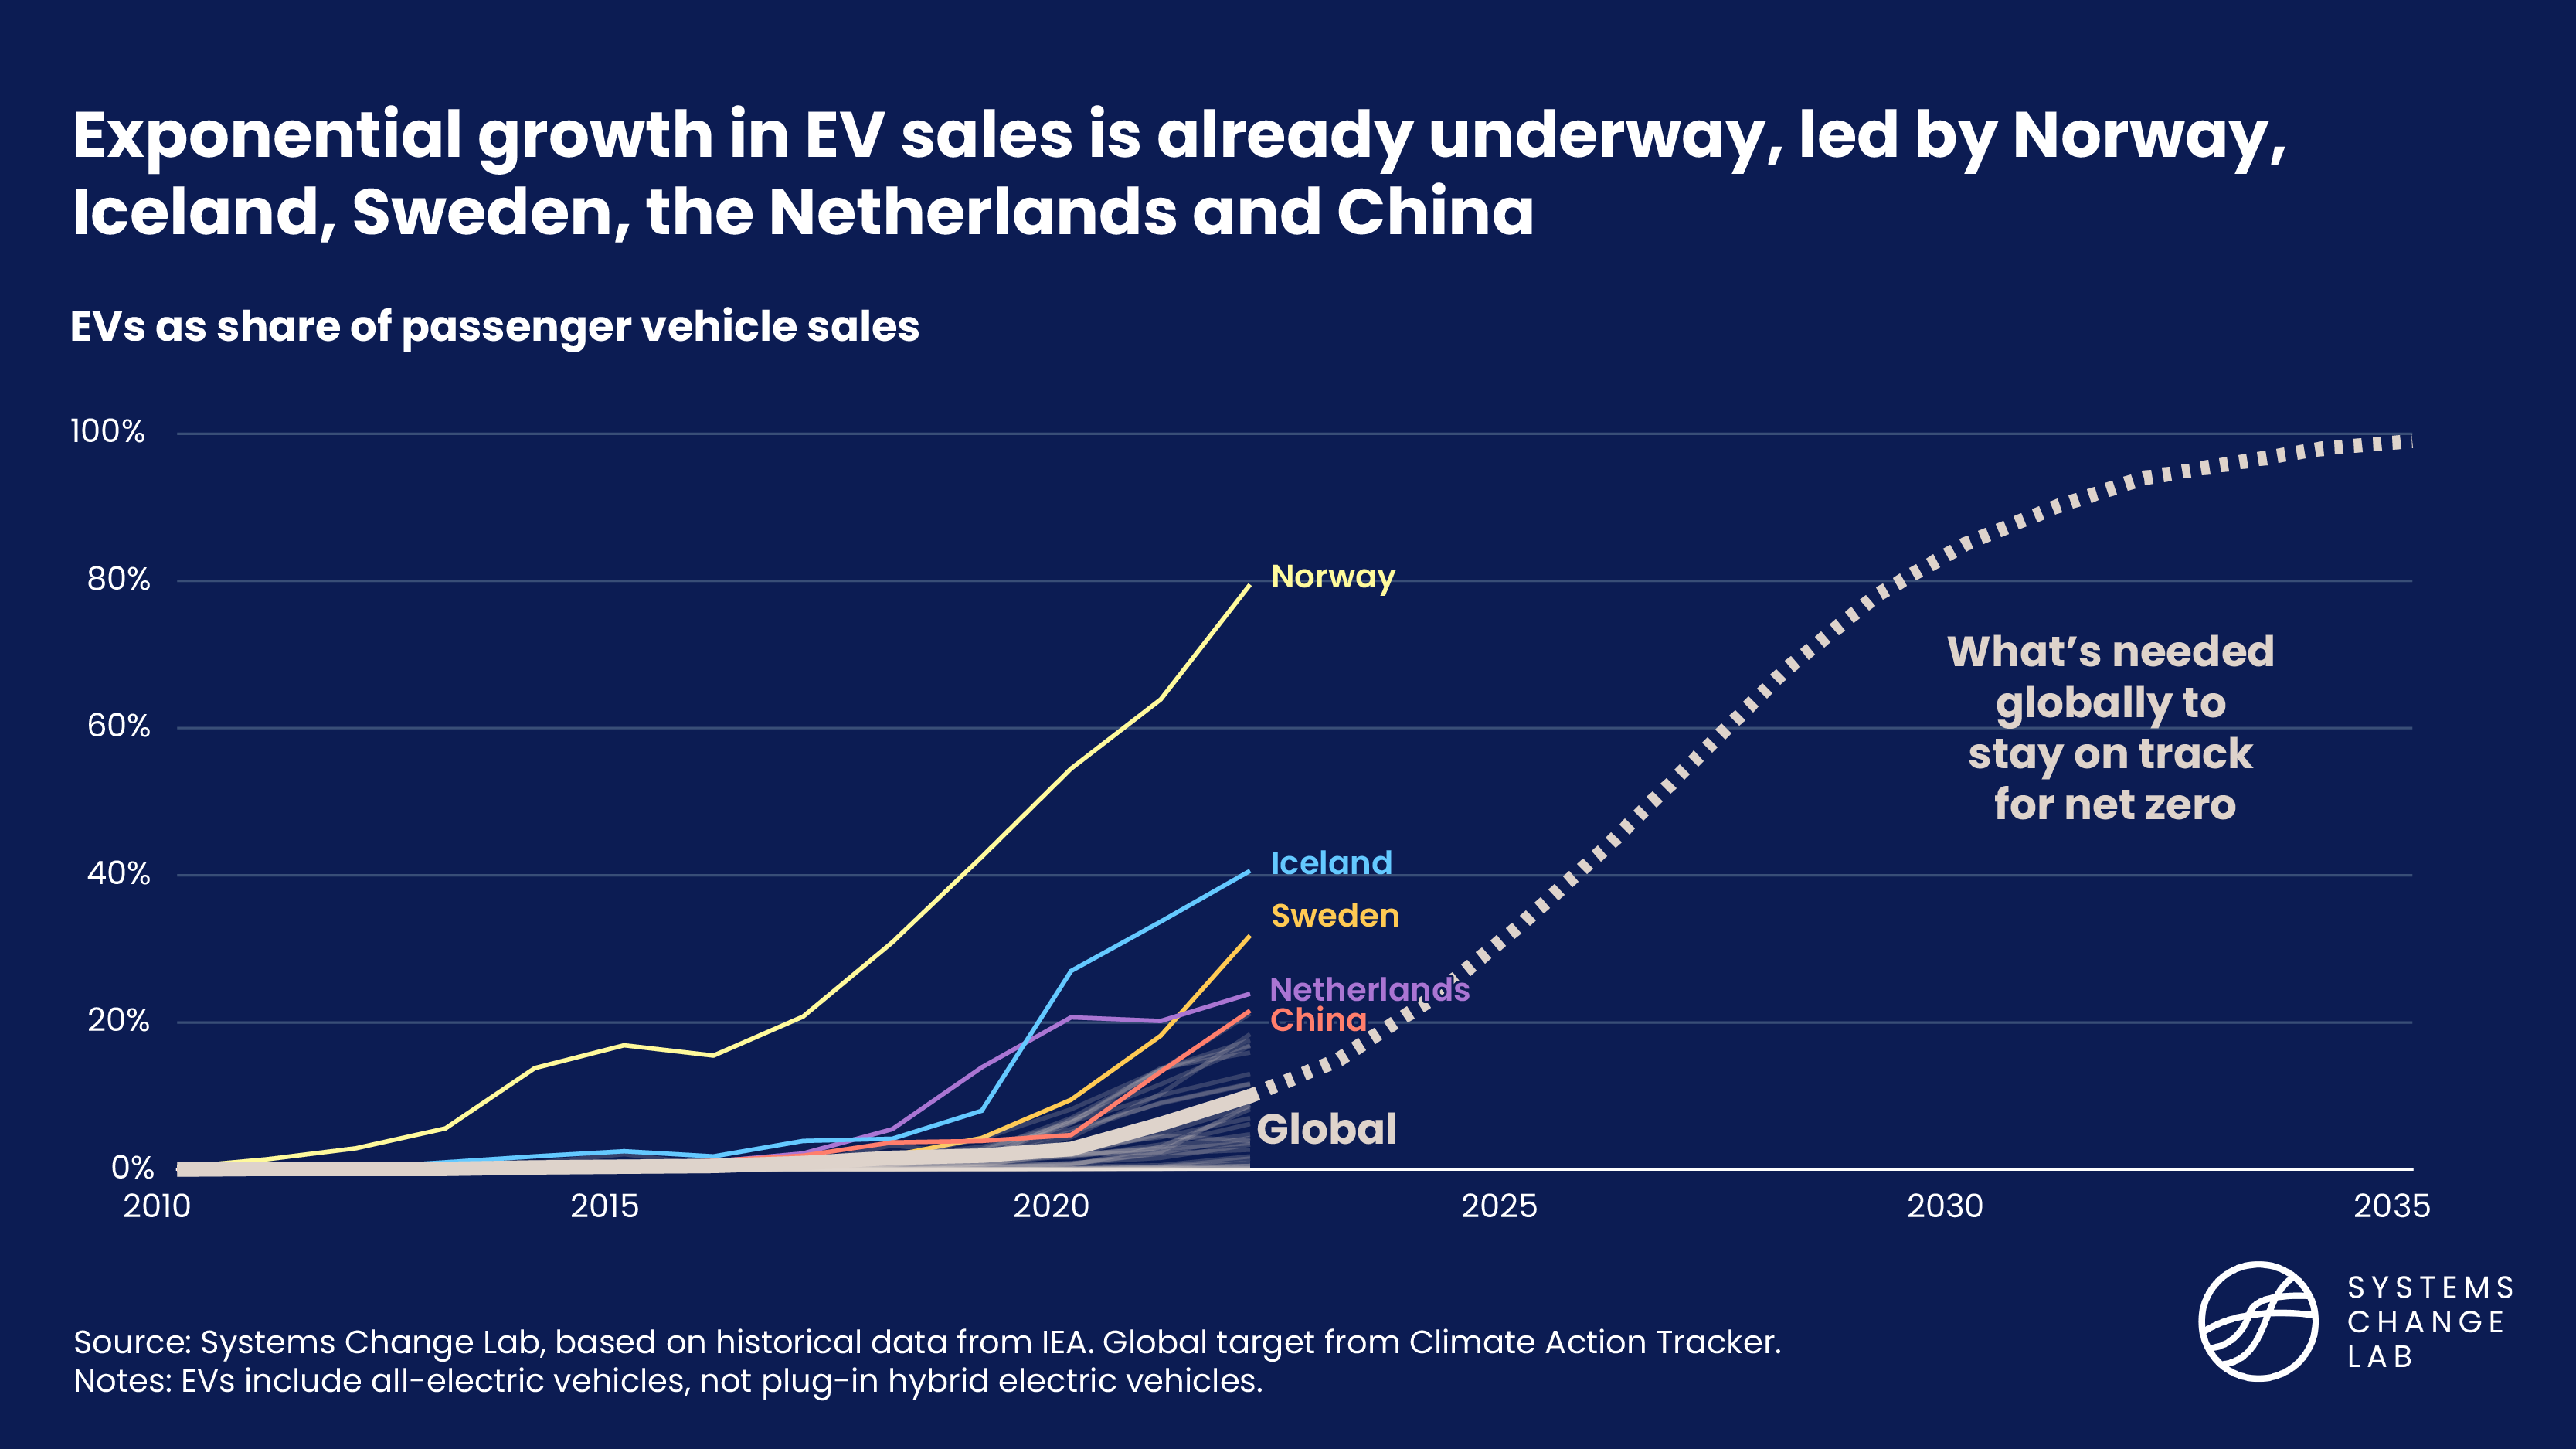 Exponential growth in EV sales is already underway, led by Norway, Iceland, Sweden, the Netherlands and China